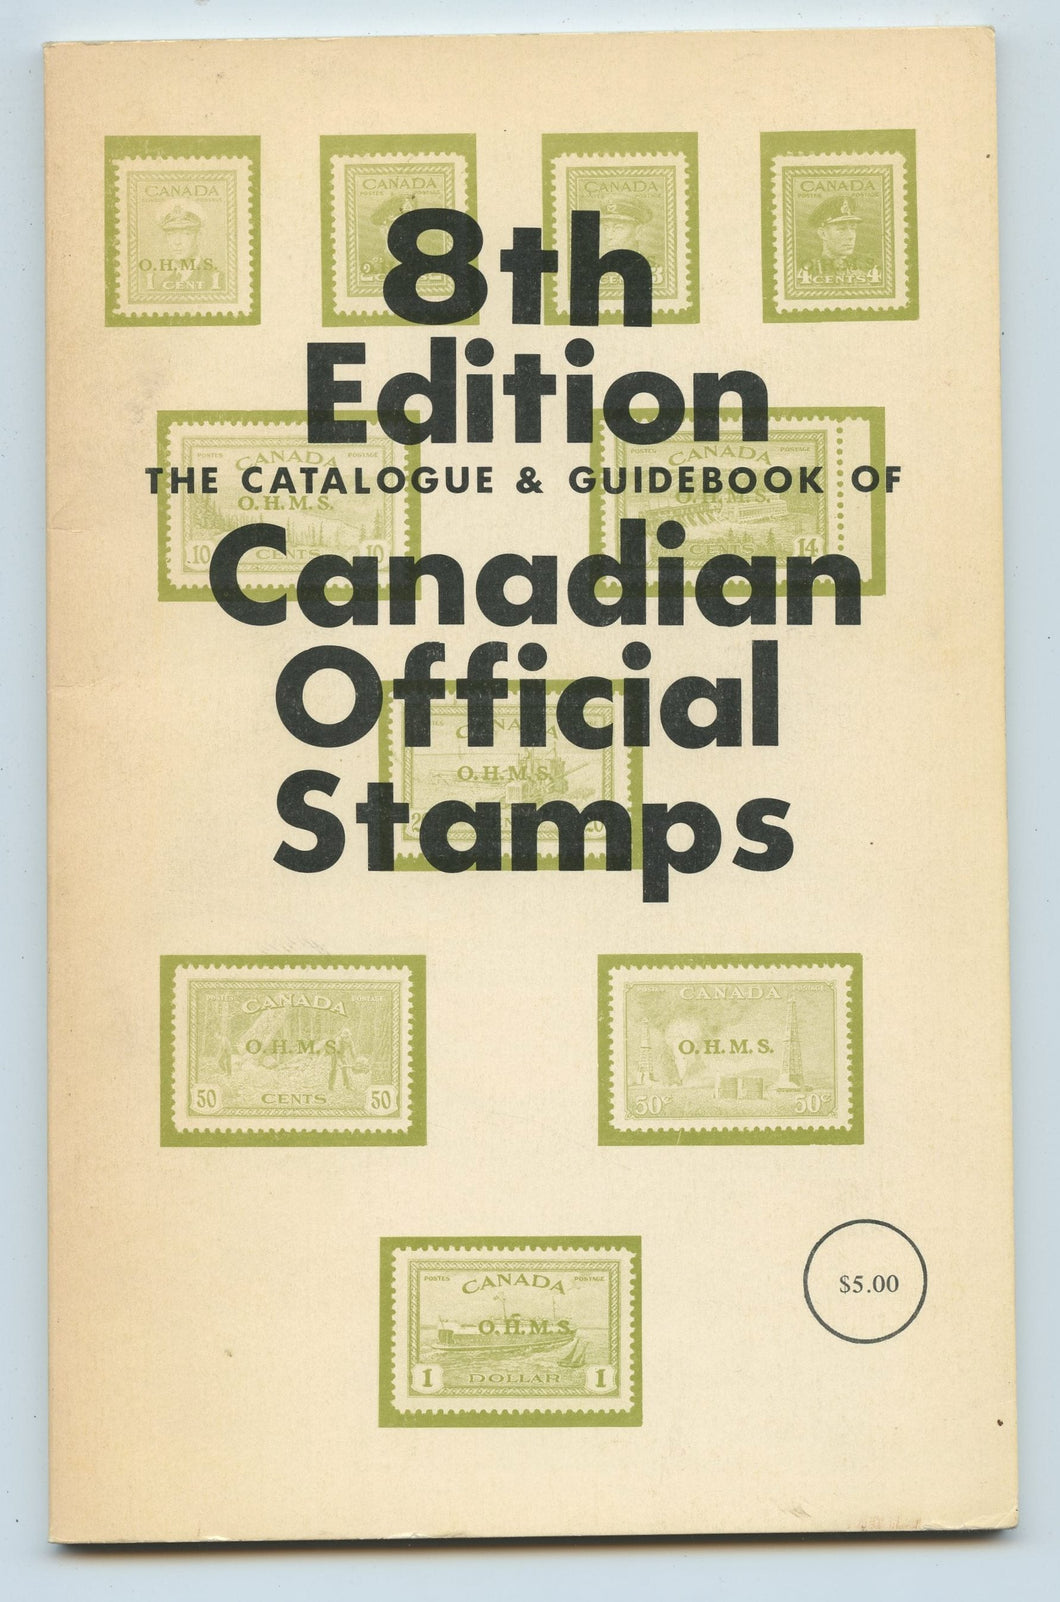 The Catalogue & Guidebook of Canadian Official Stamps